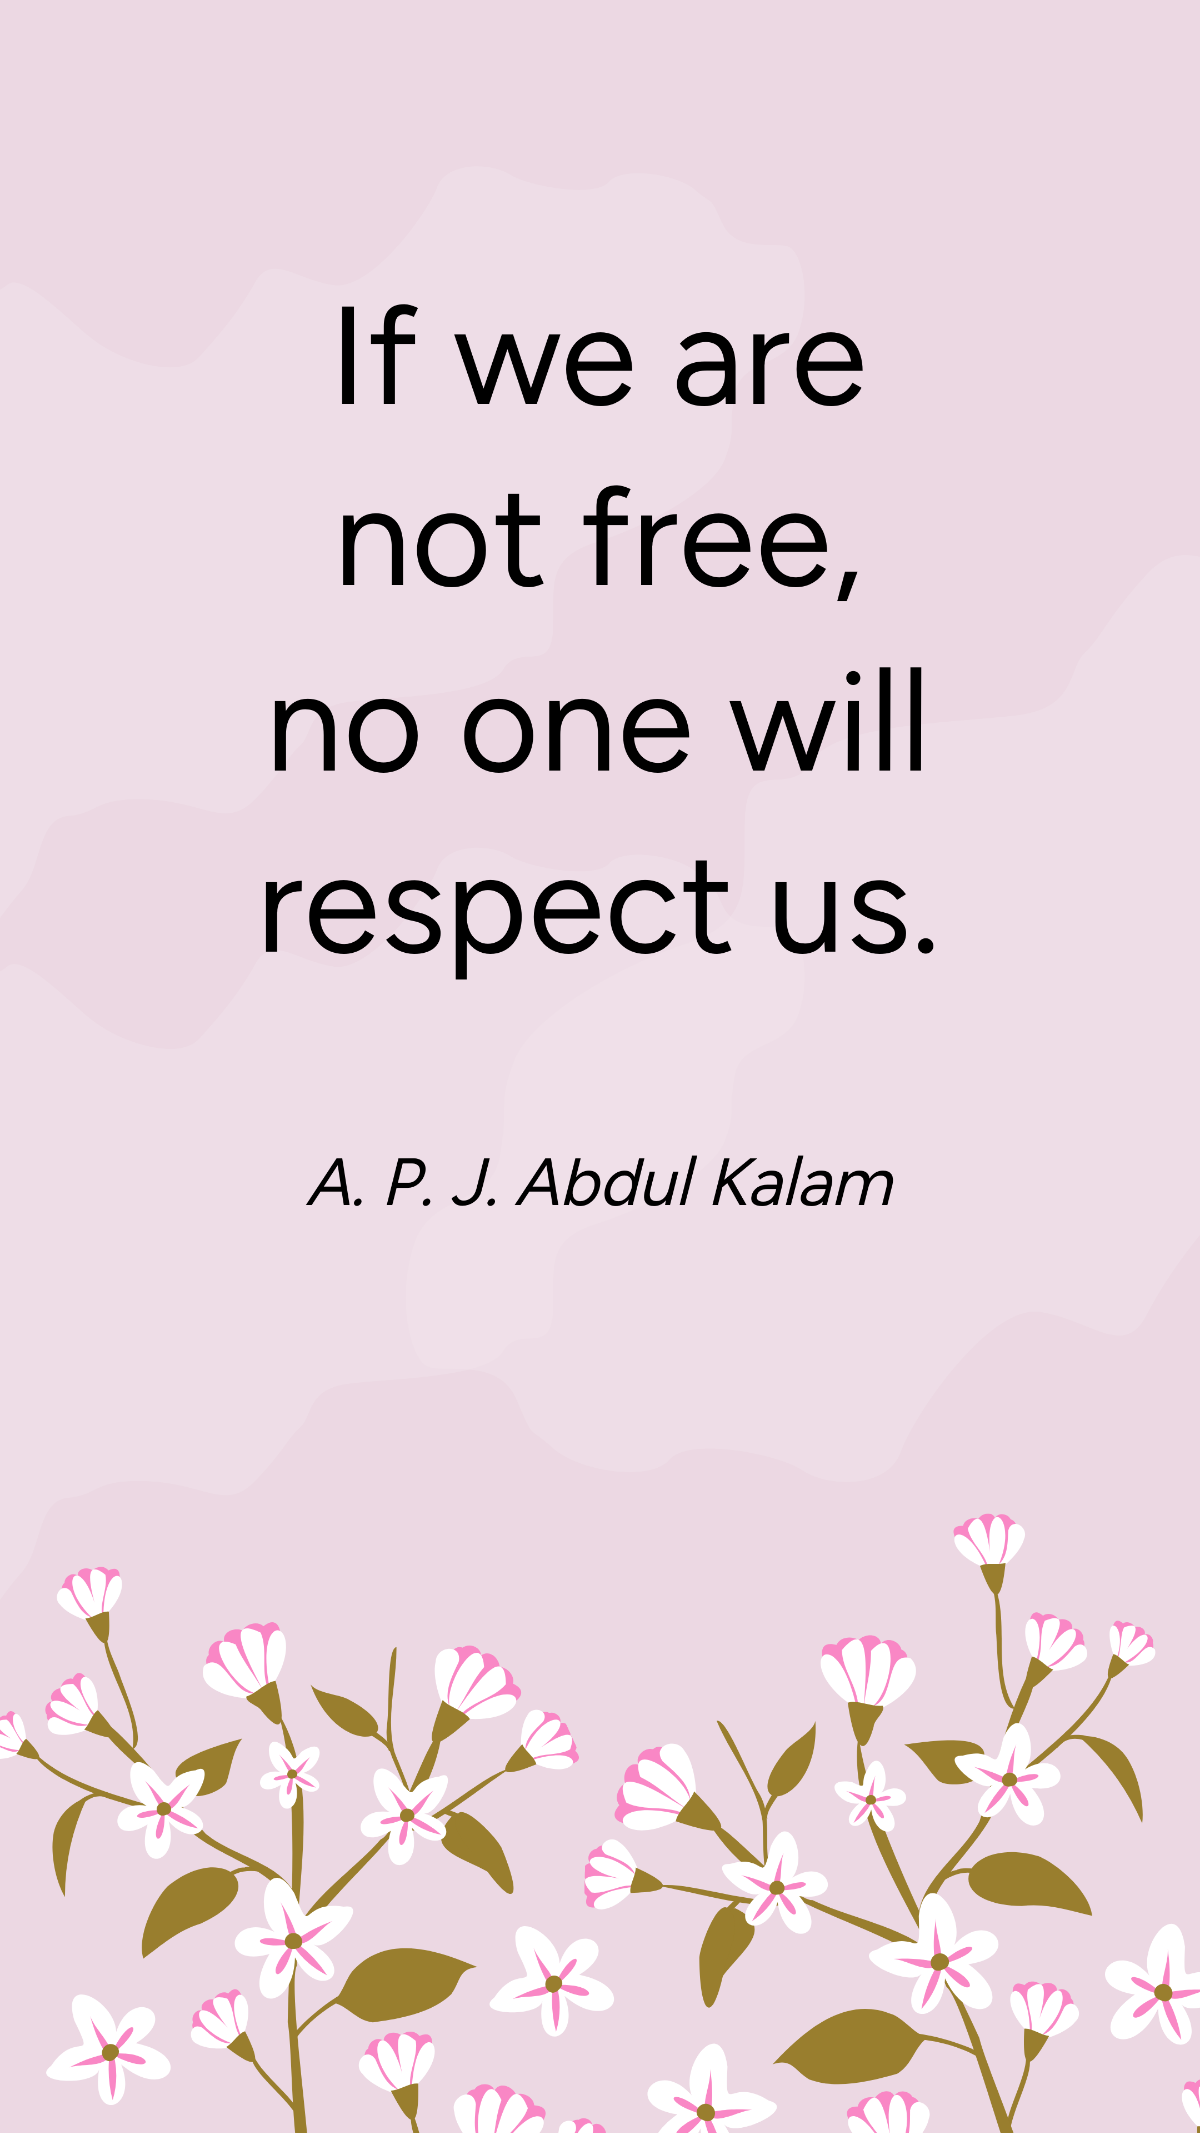 A. P. J. Abdul Kalam - If we are not free, no one will respect us. Template